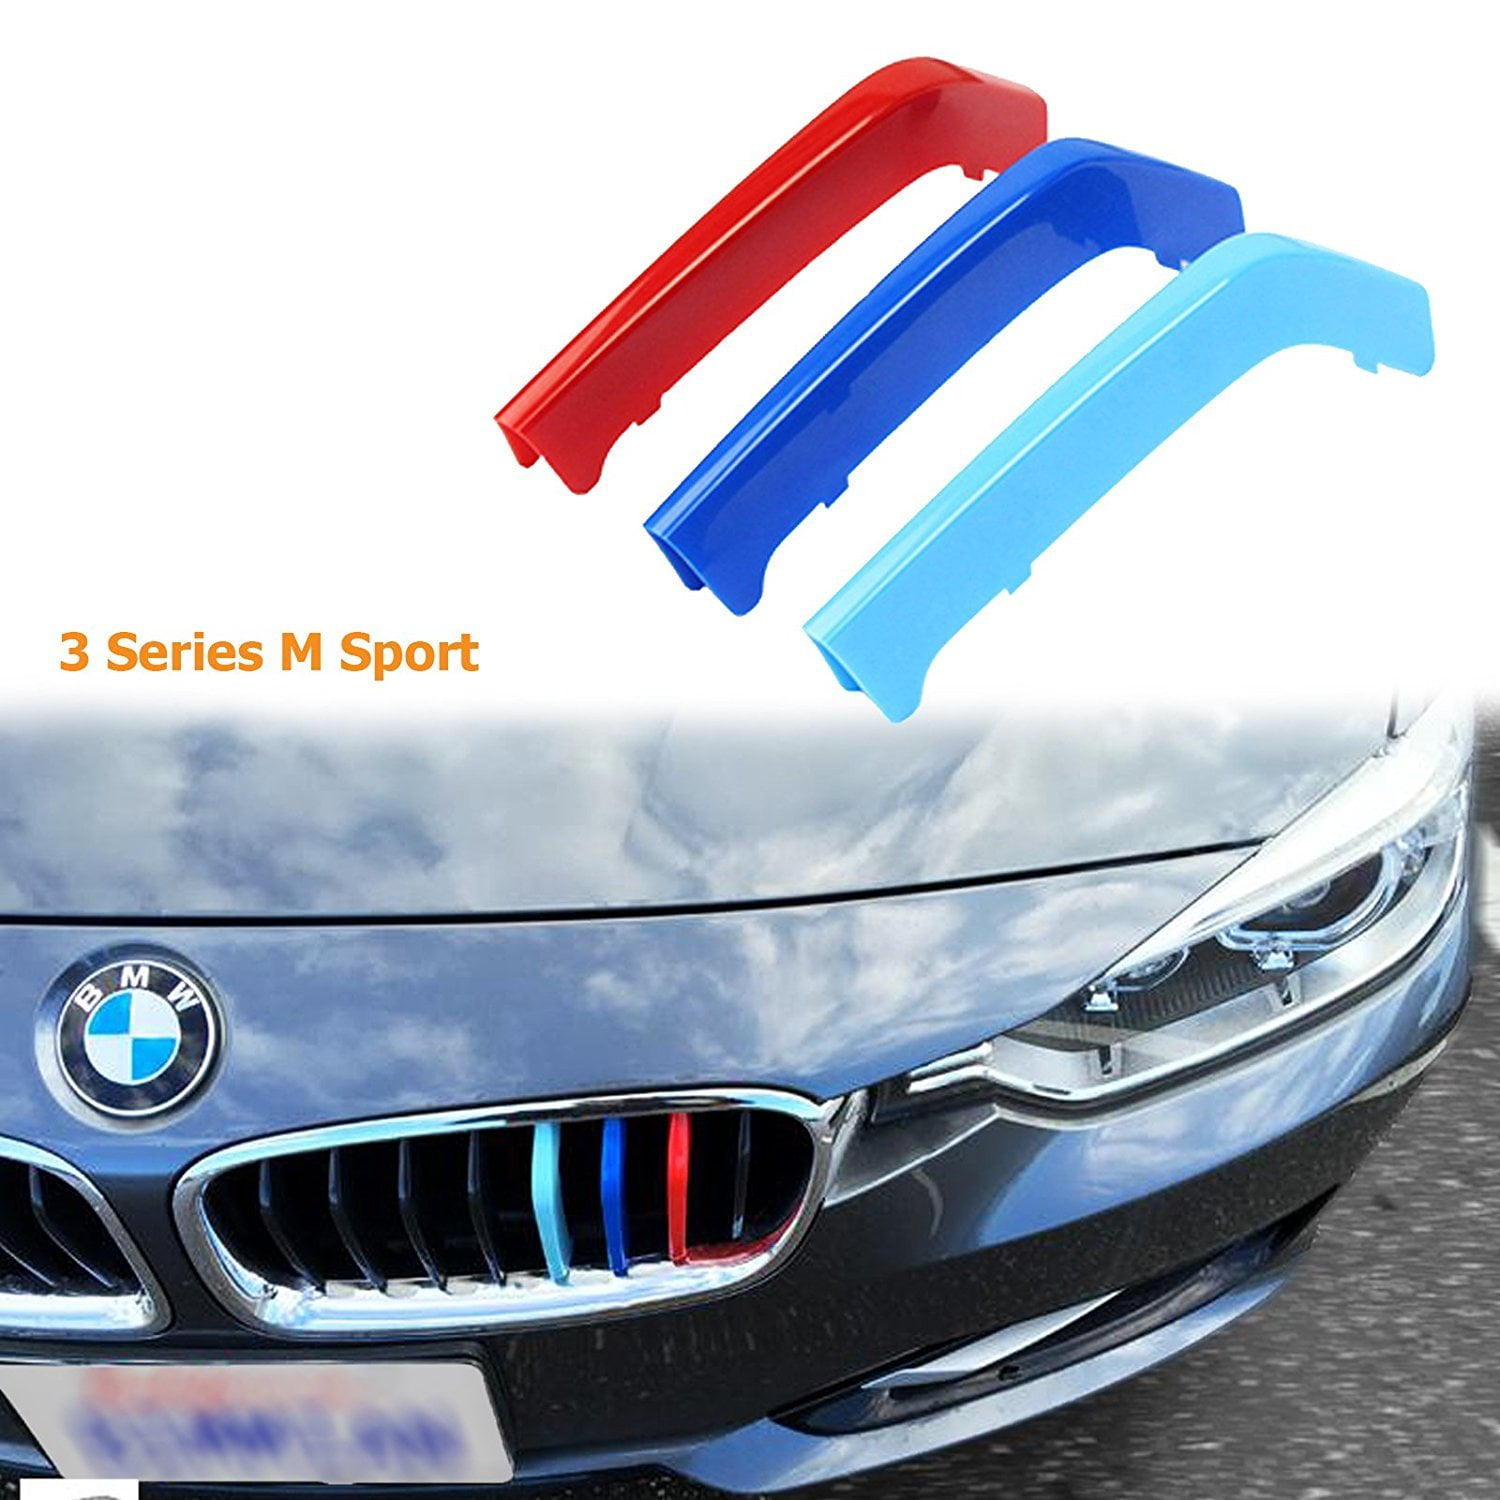 M-Tech 11 BAR Kidney Grille 3 Colour Cover Insert Stripe fit BMW F22 F23 2013-17